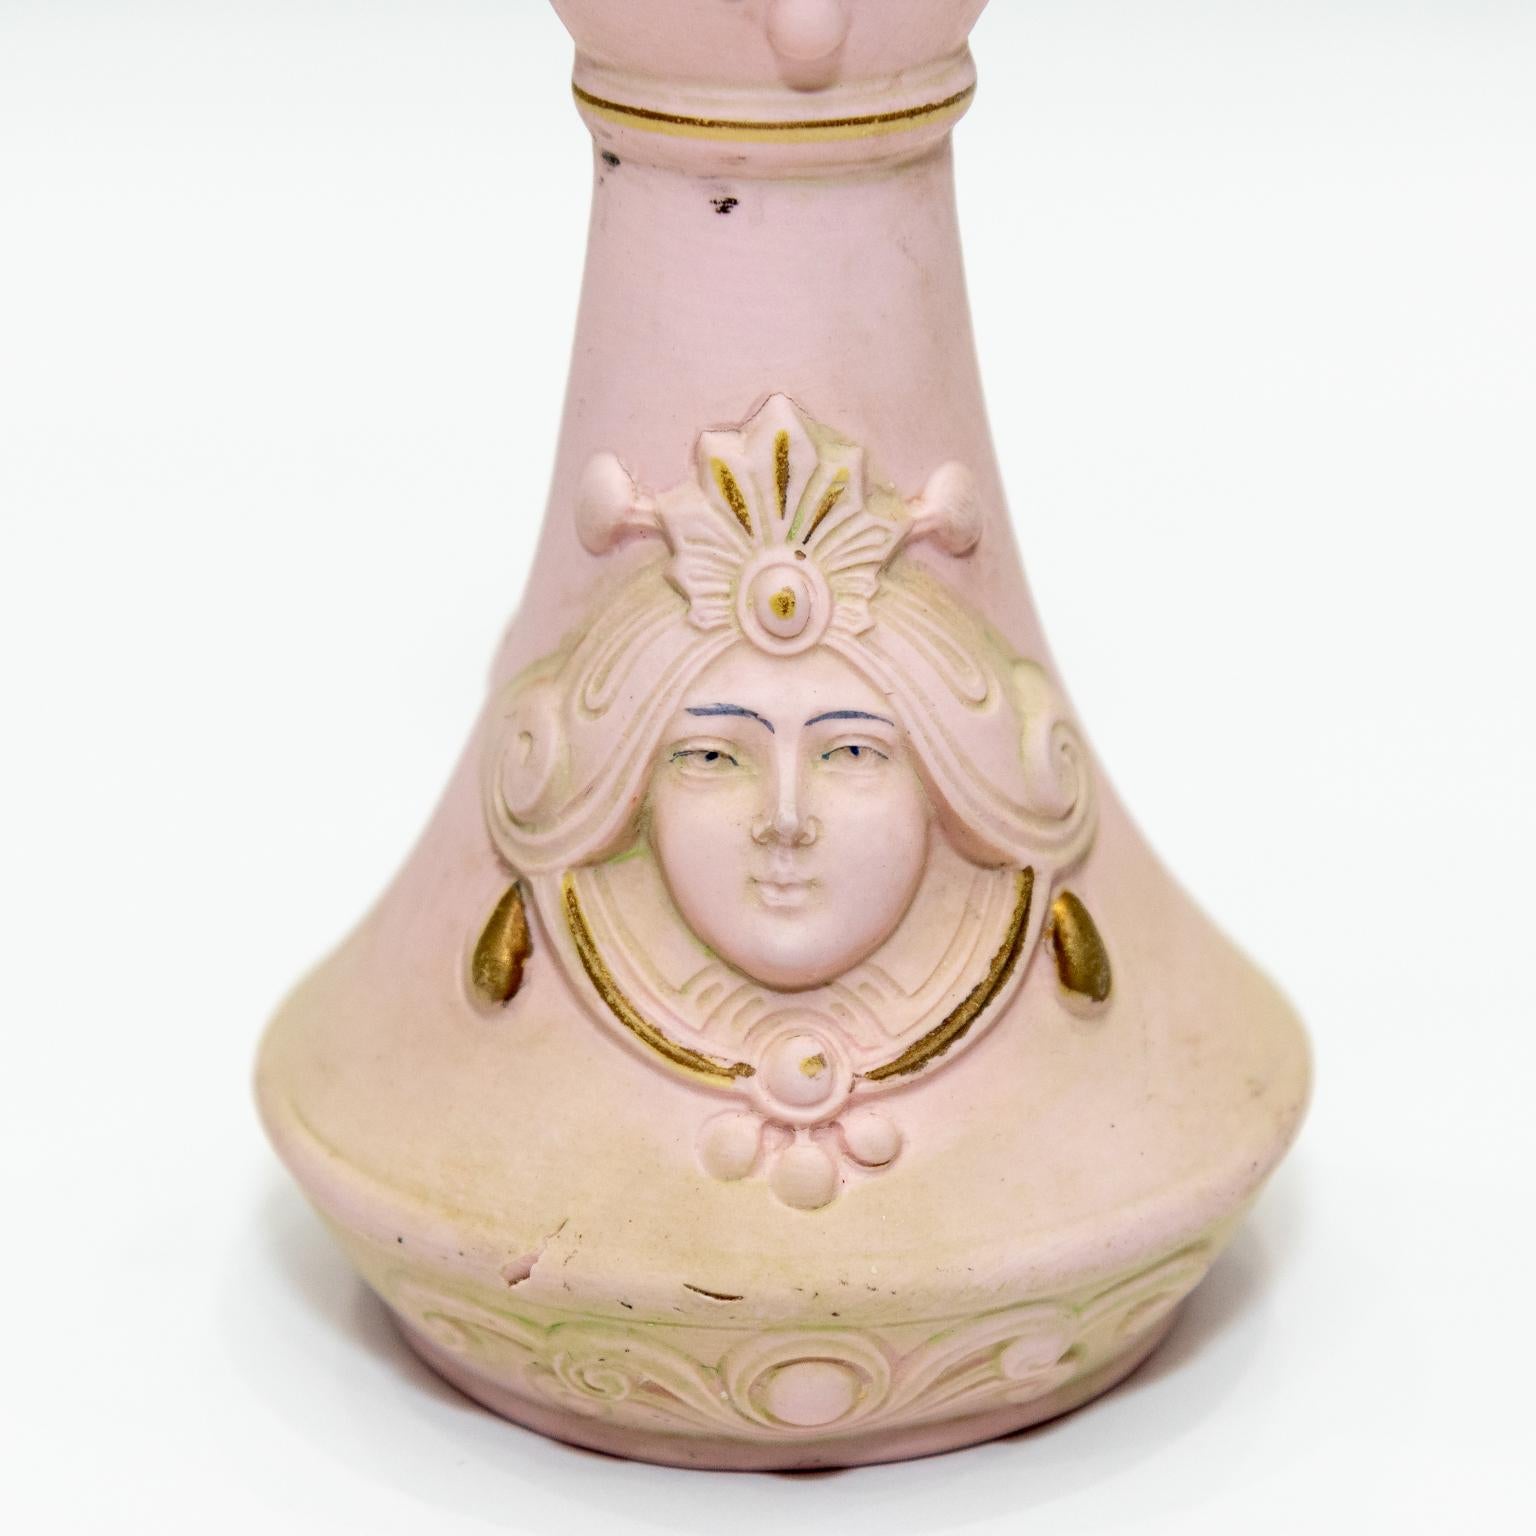 Circa early 20th century porcelain hat pin holder which bears the mark of Schafer and Vater from Germany. The piece depicts a woman in an Art Nouveau design as seen on the base. Made in Germany. Please note of wear consistent with age including